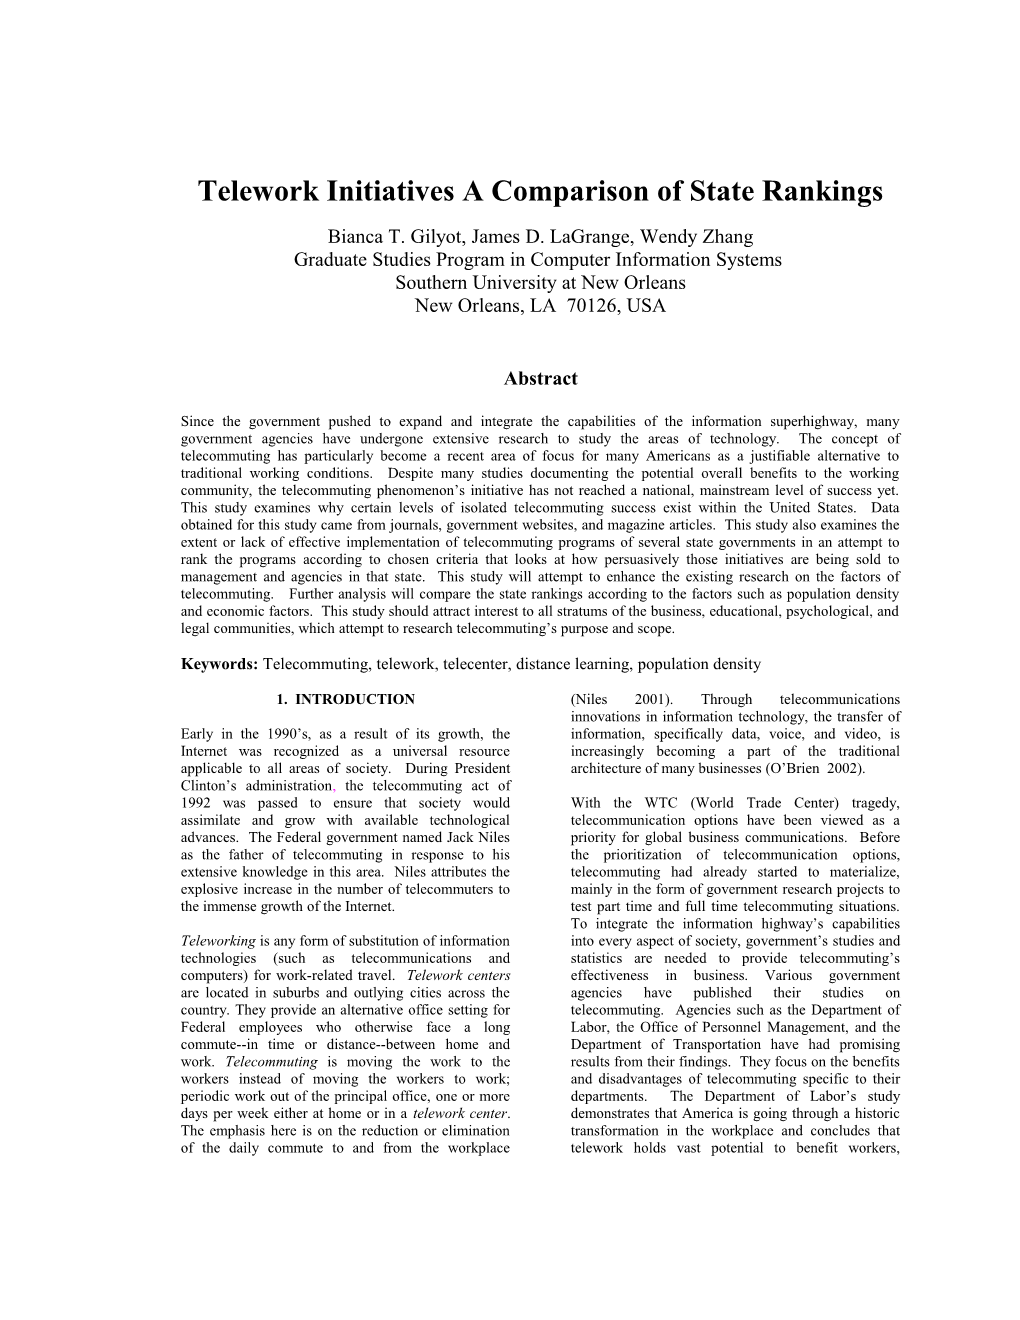 Telework Initiatives a Comparison of State Rankings